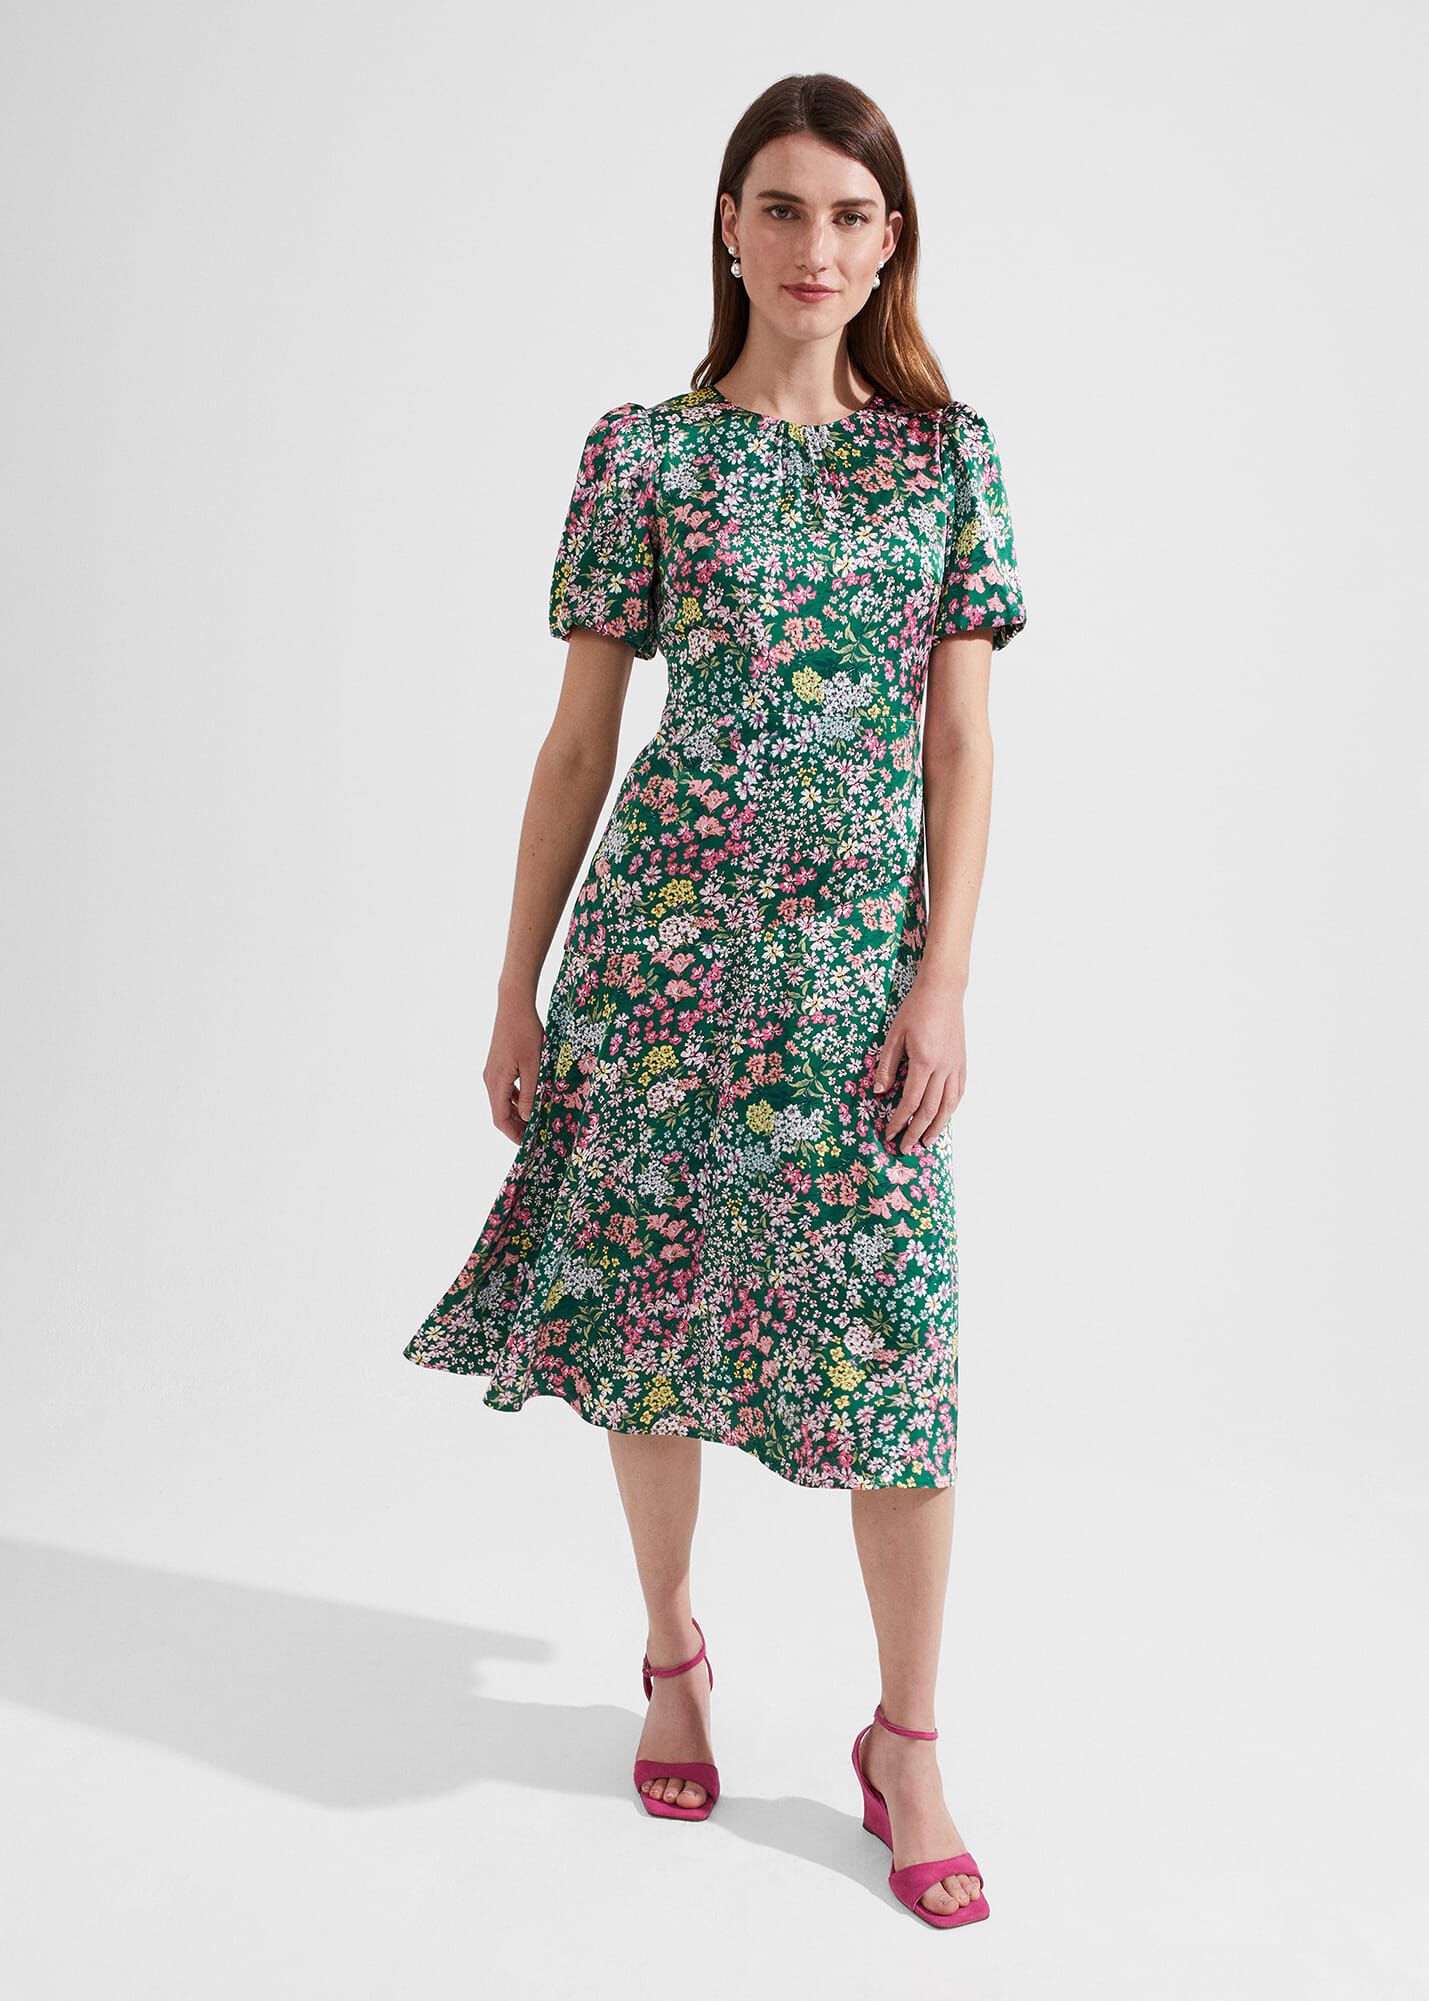 Jolie Moi Sloane Fit and Flare Dress, Black at John Lewis & Partners